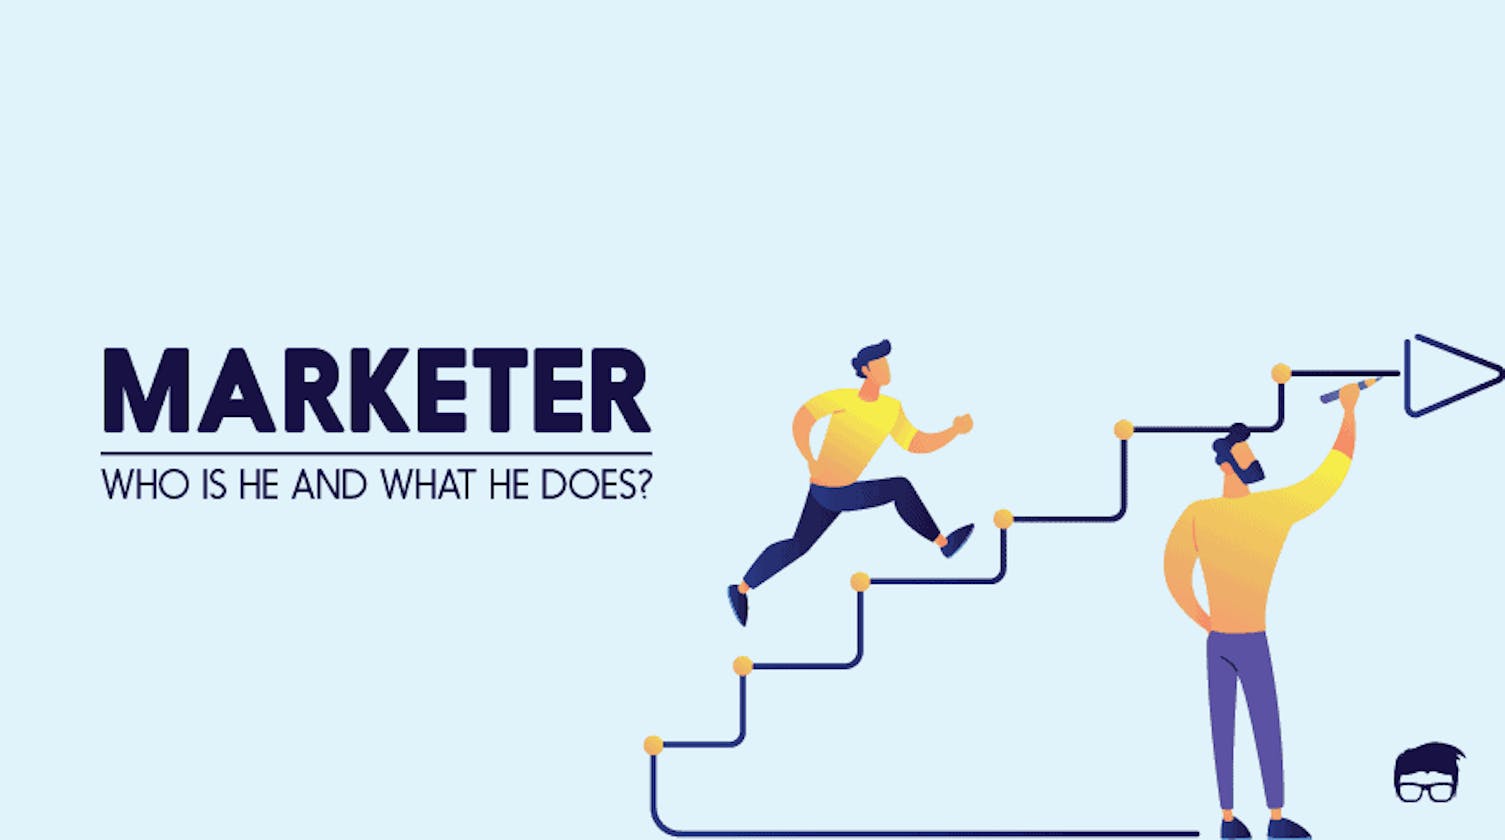 Marketer. 
who Is He And What Does He Do?